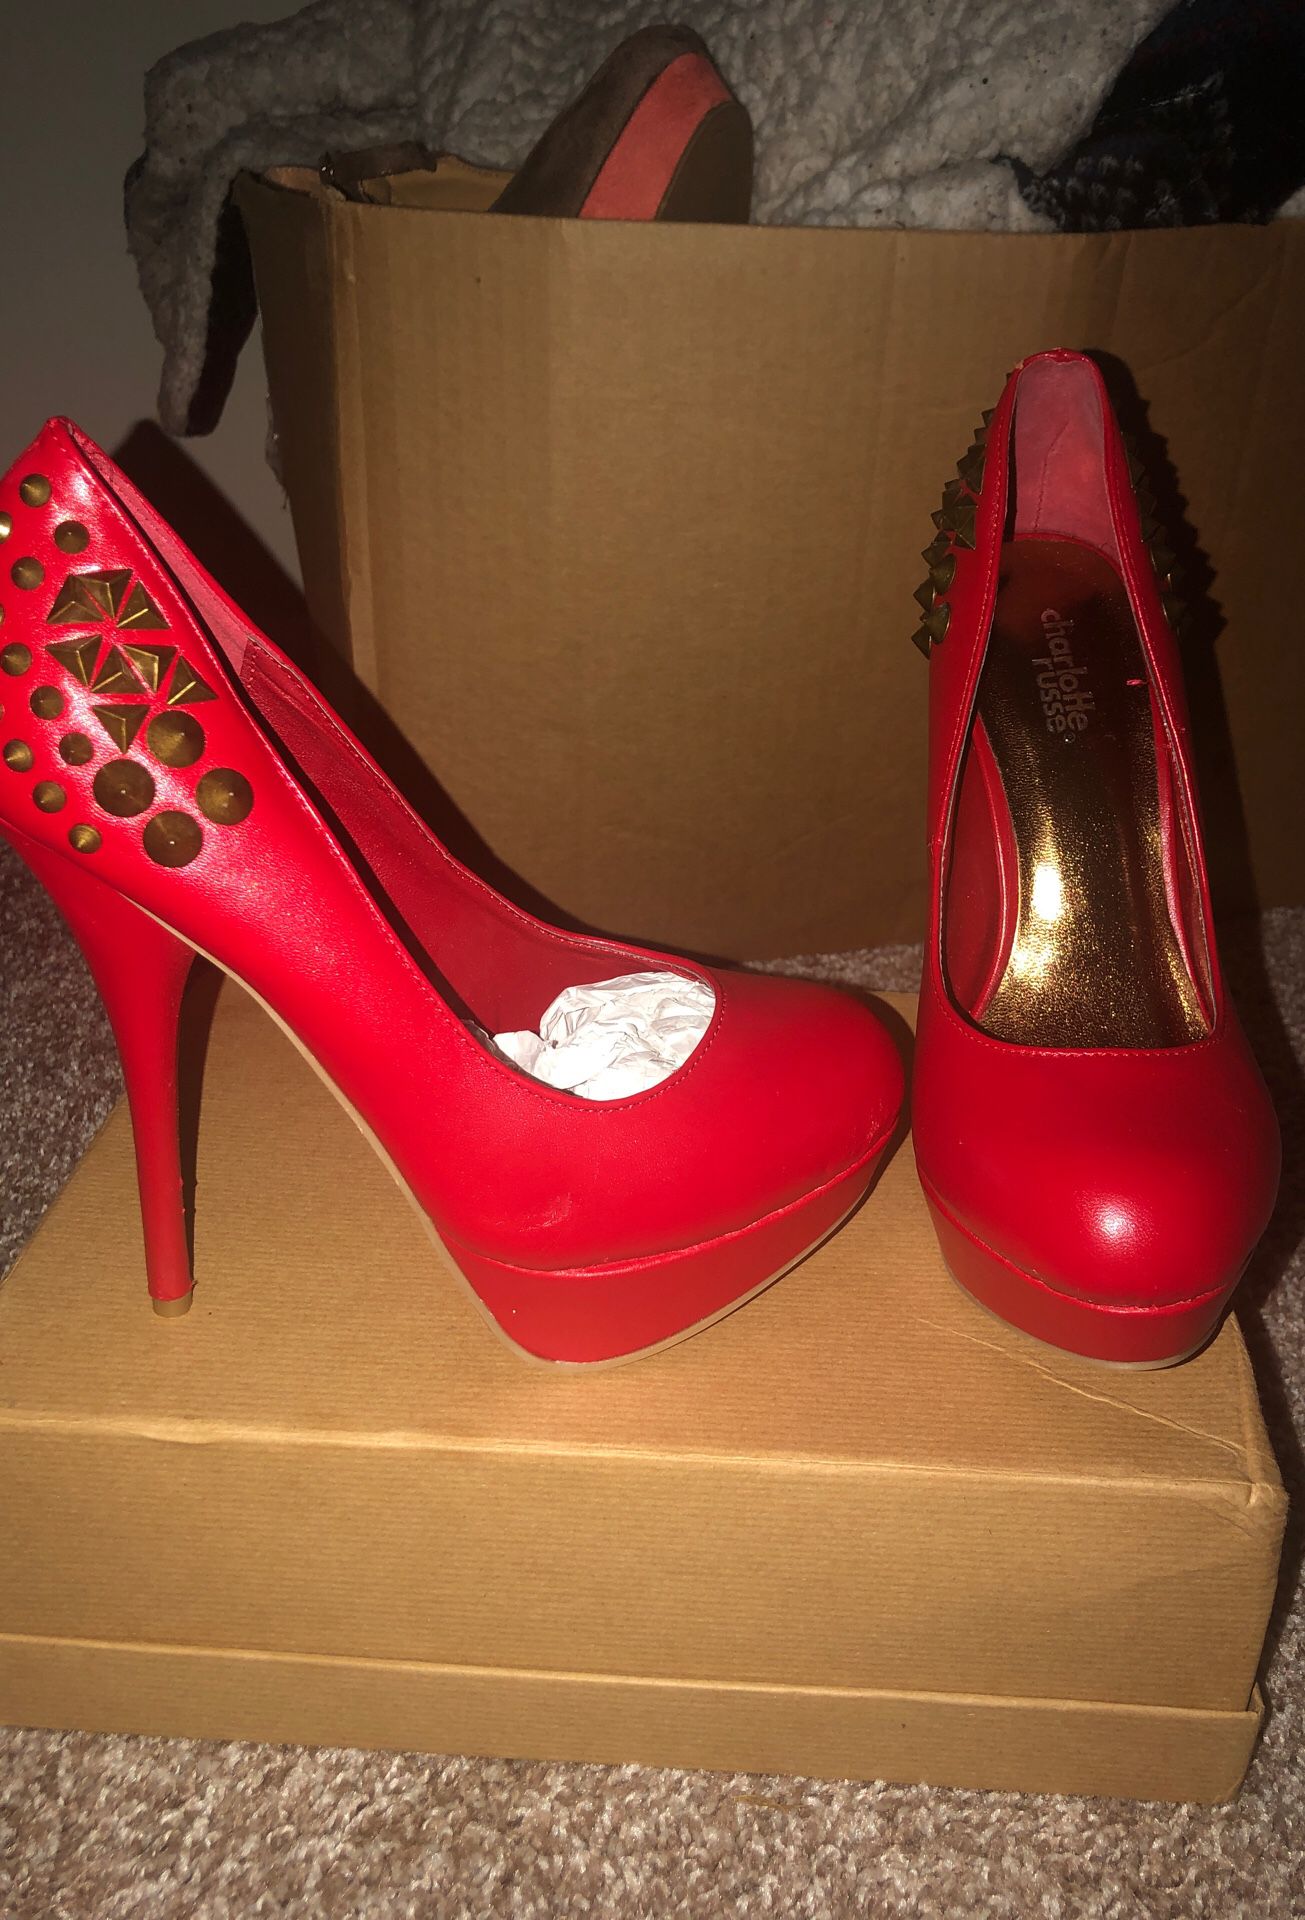 Red spiked heels